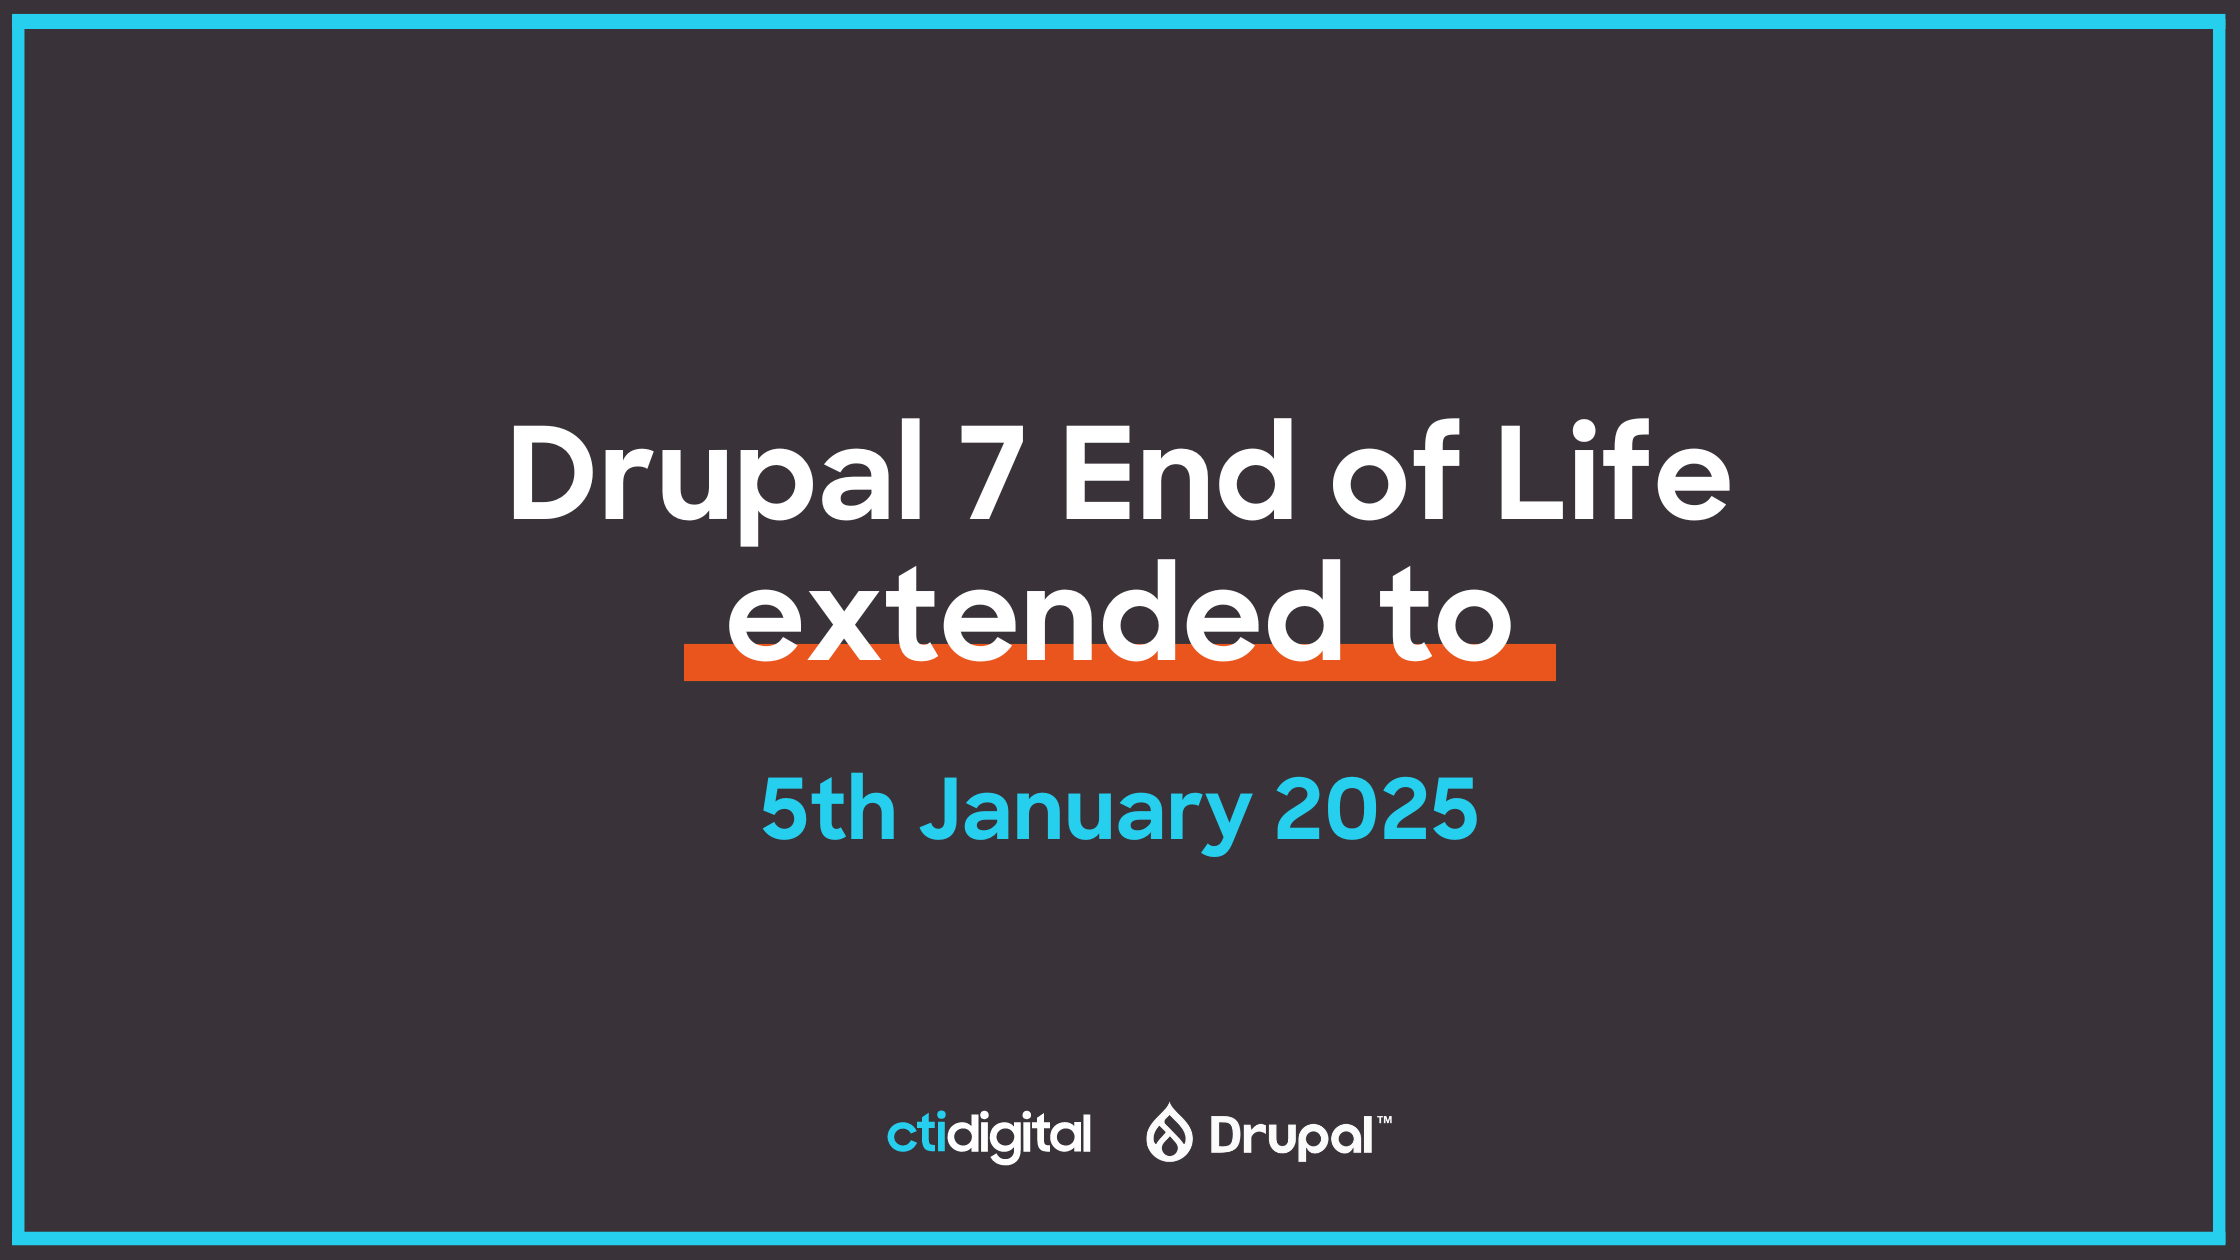 Drupal 7 End of Life Date Extended to 5 January 2025